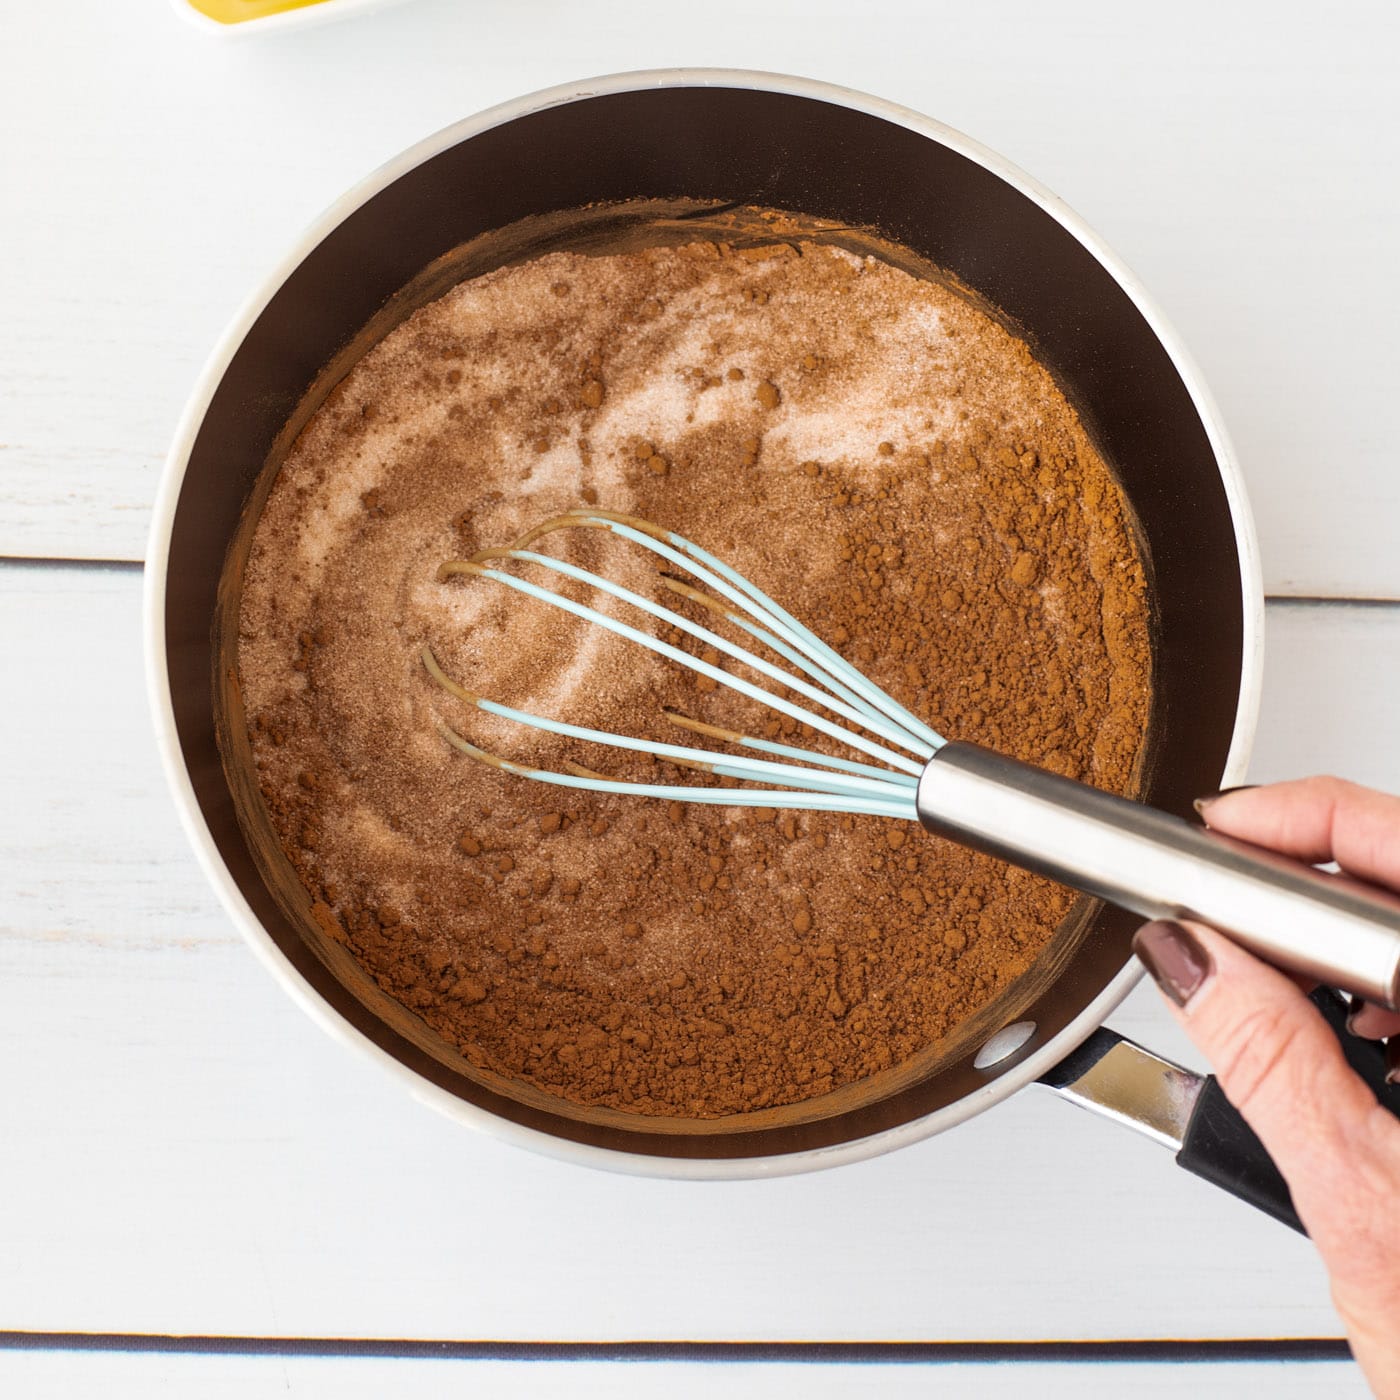 whisking together sugar and cocoa powder